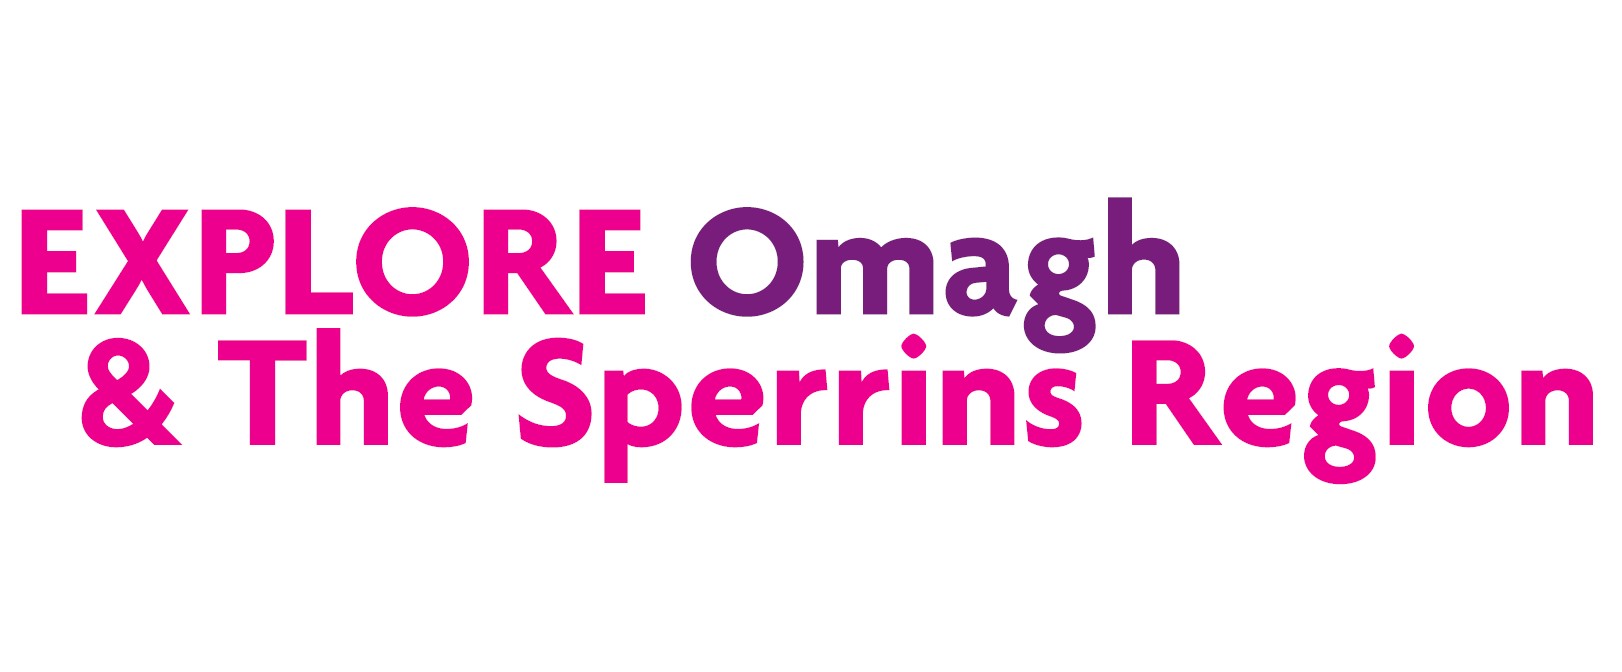 Explore Omagh & the Sperrins Region